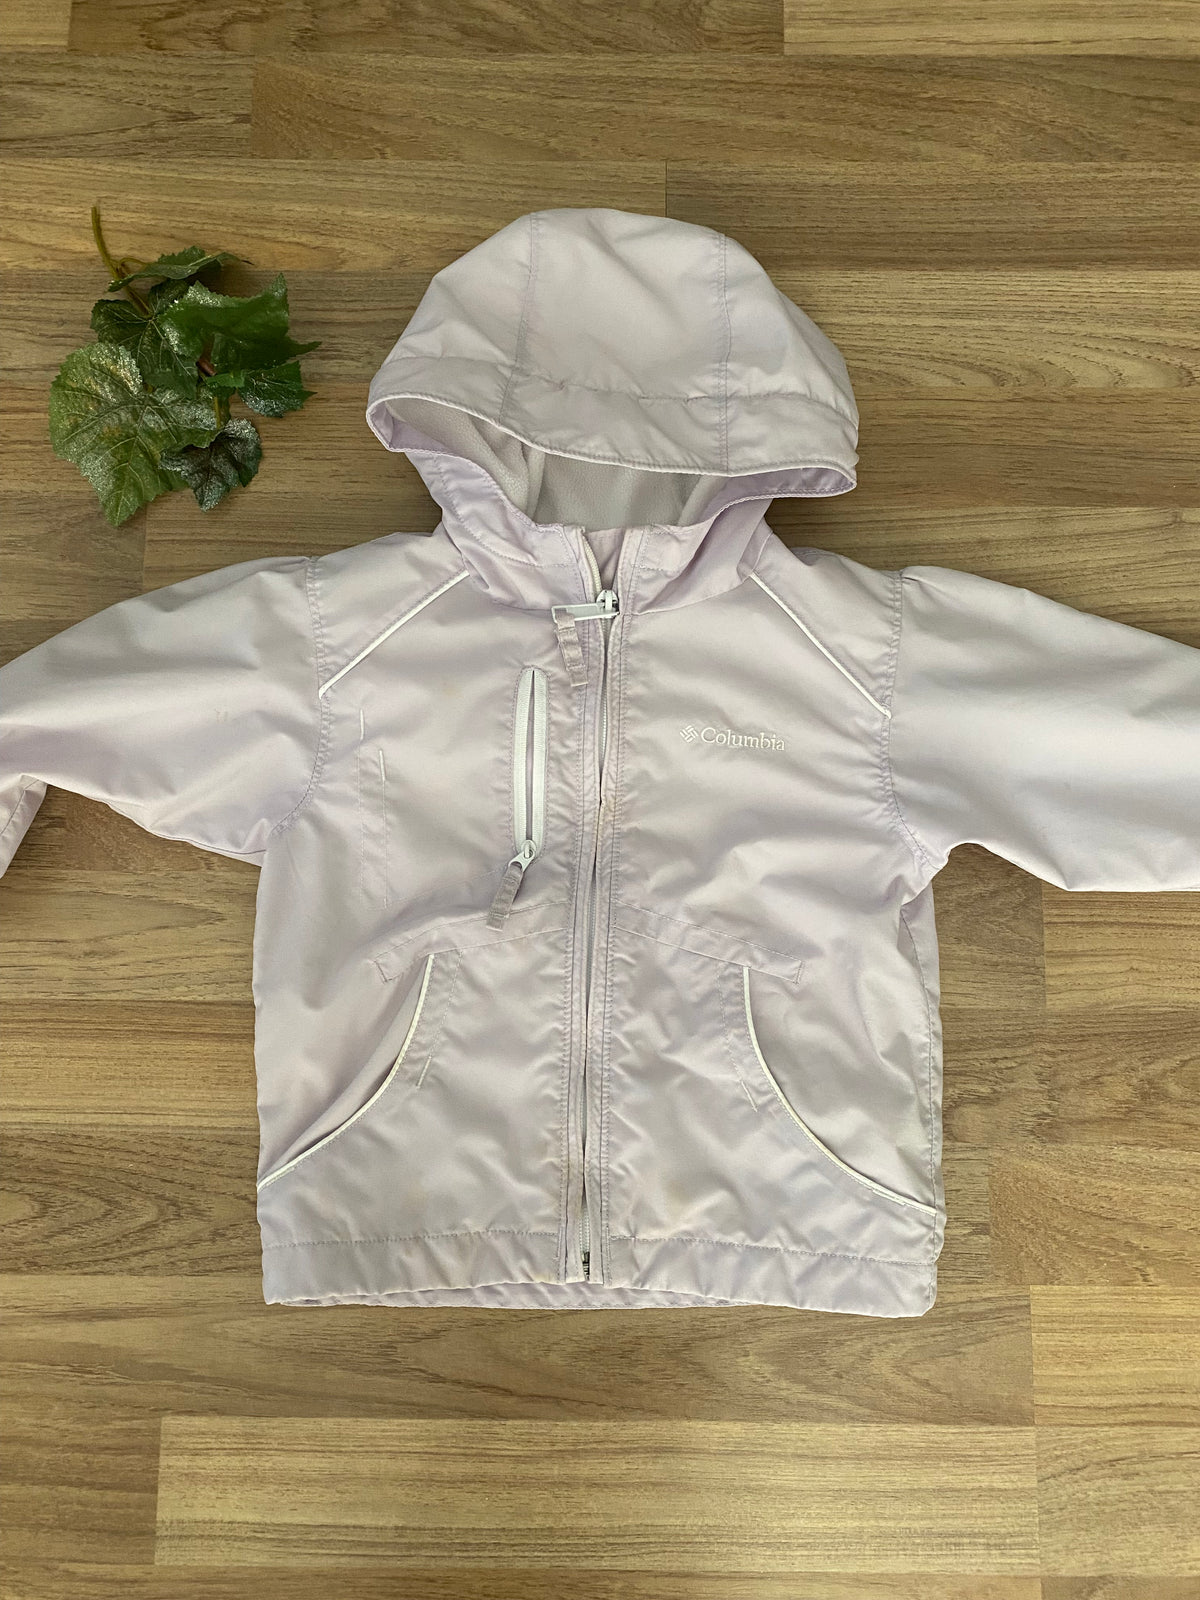 Full Zip Up Hooded Fall Jacket (Girls Size 3)